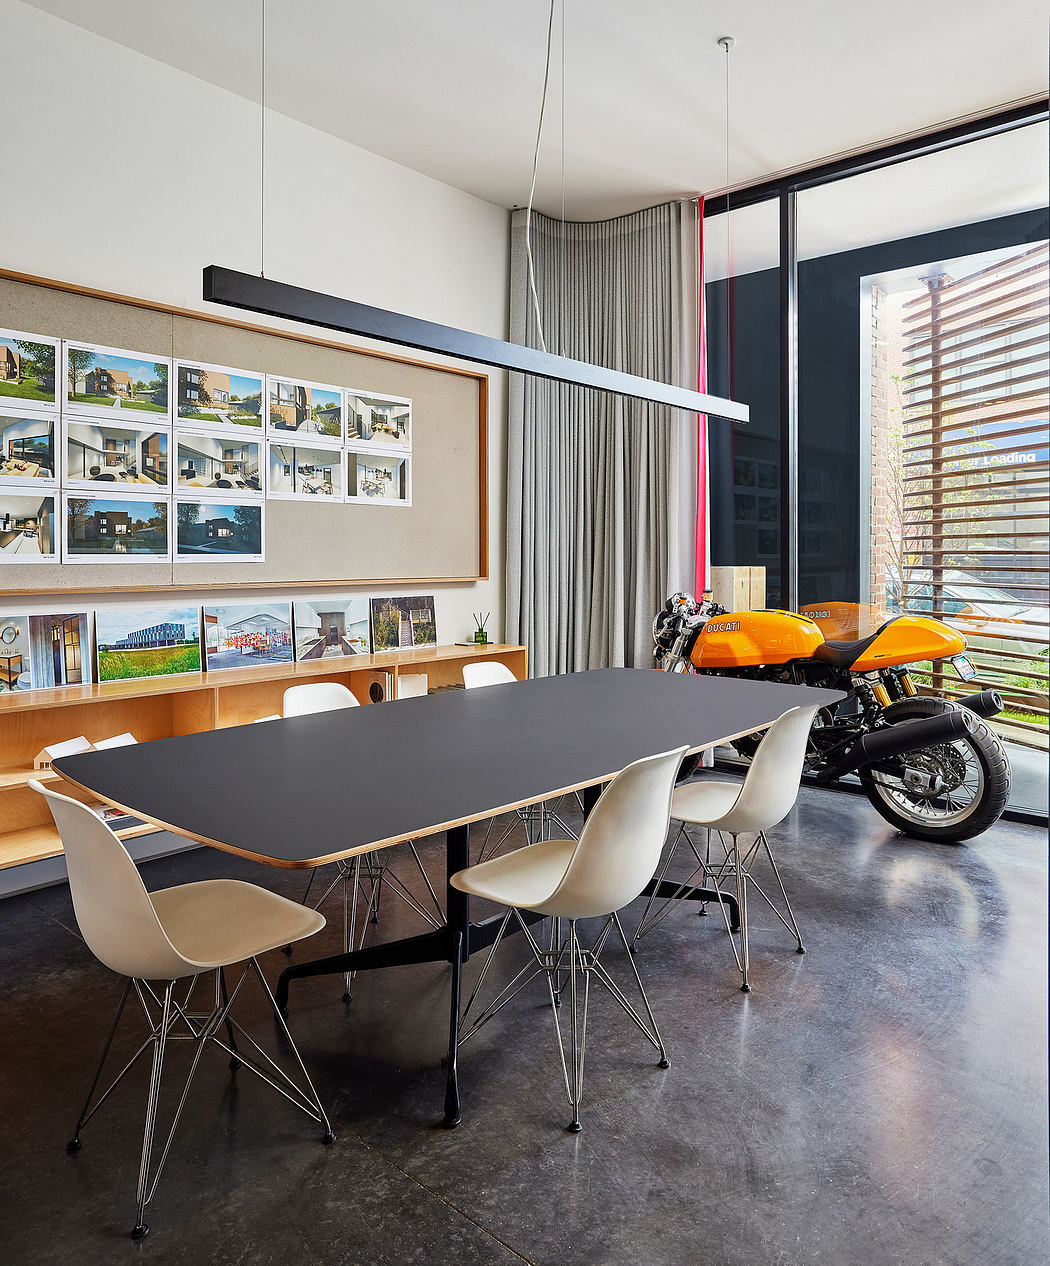 Modern open-concept room with sleek black table, white chairs, and motorcycle display.